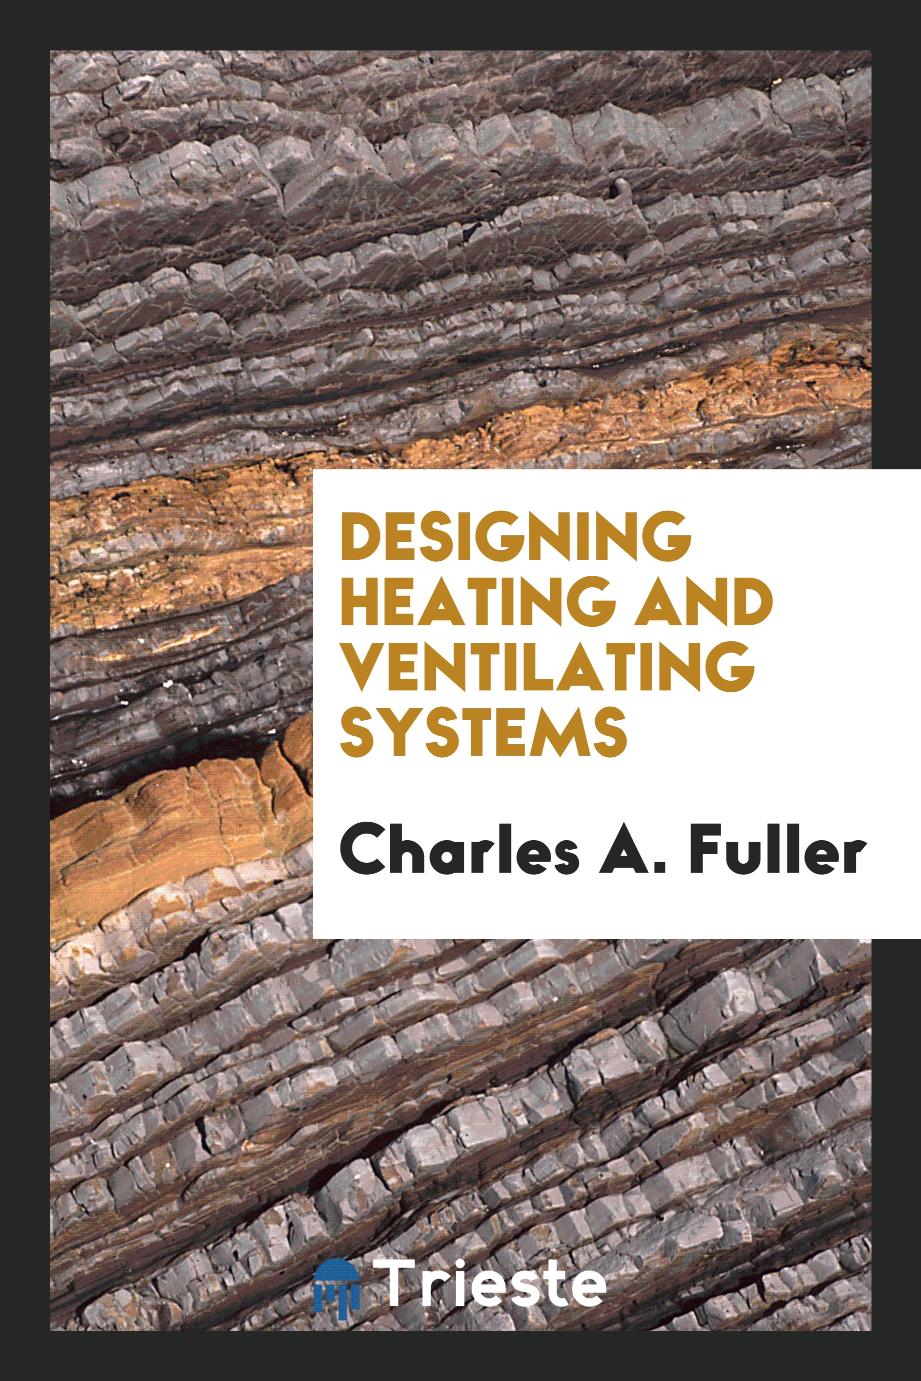 Designing heating and ventilating systems